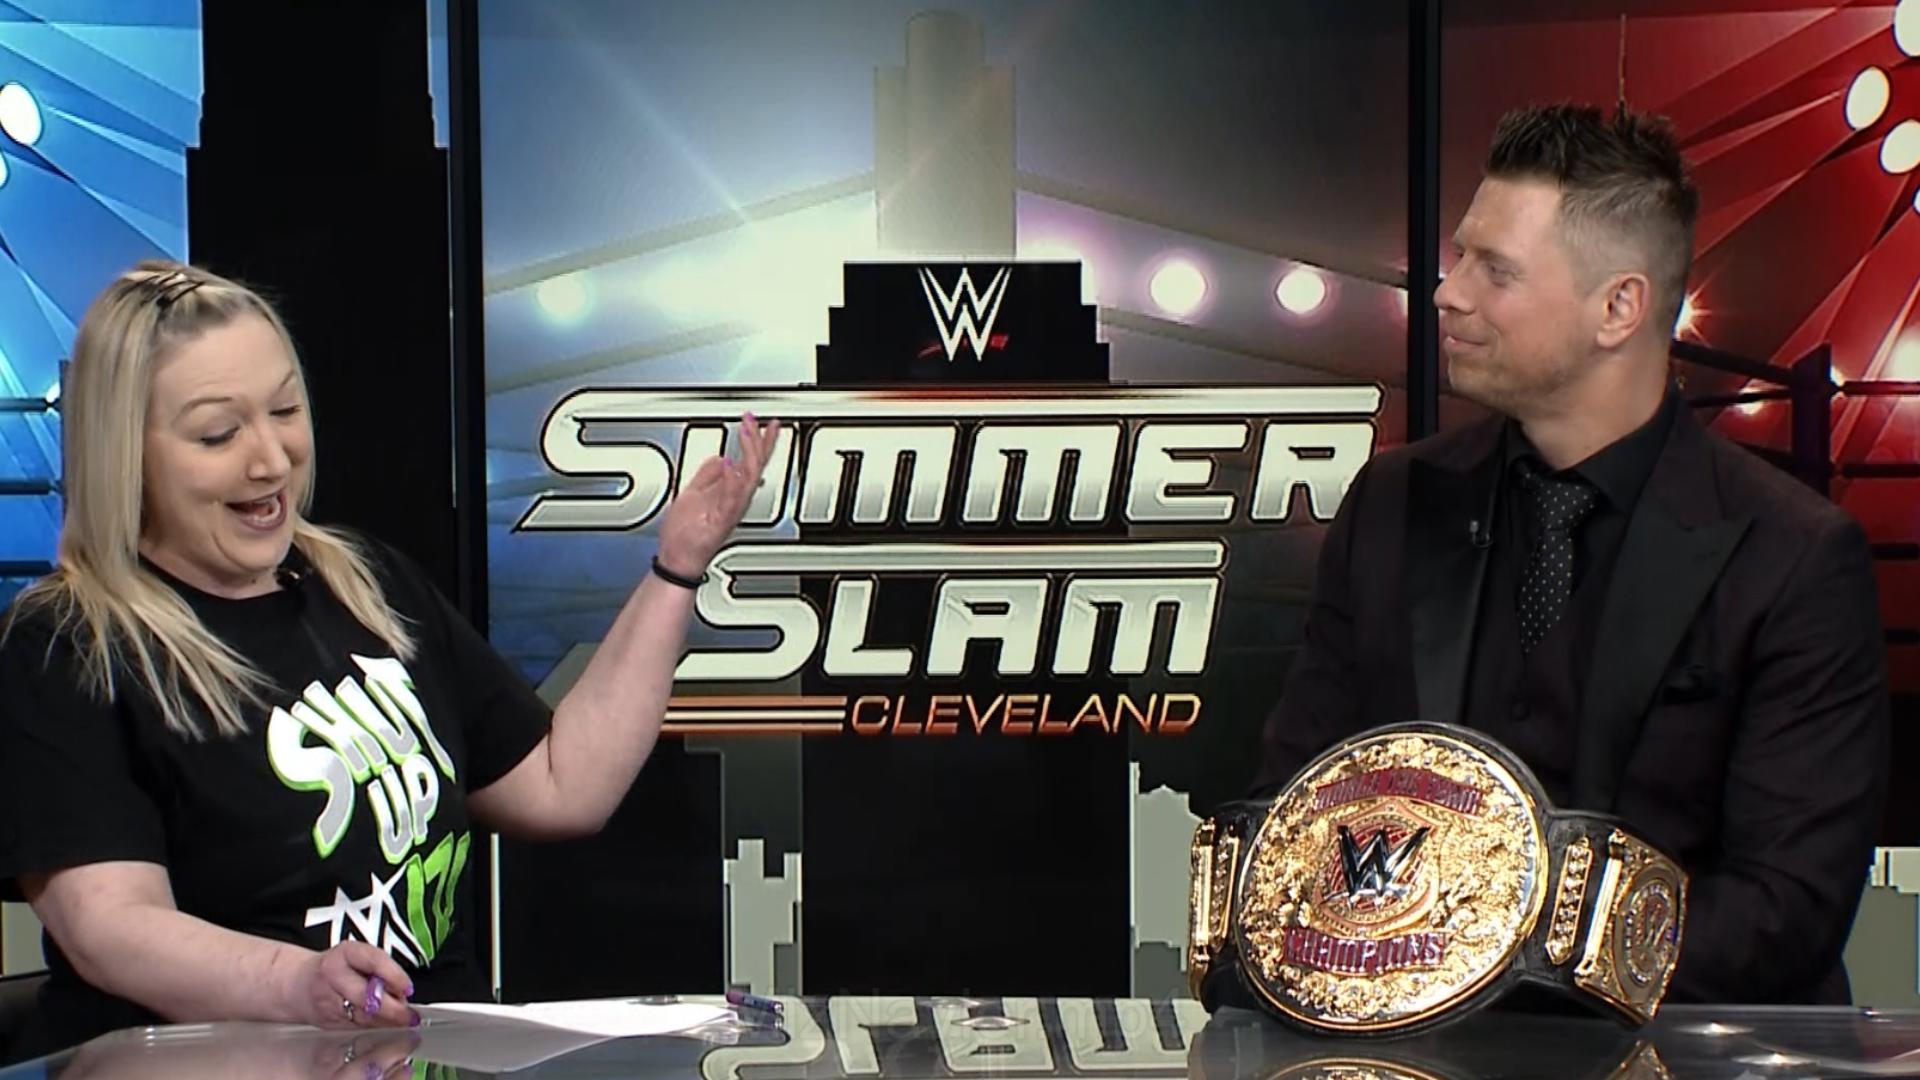 WWE Superstar 'The Miz' is back in his native Northeast Ohio as SummerSlam comes to Cleveland Browns Stadium this August.